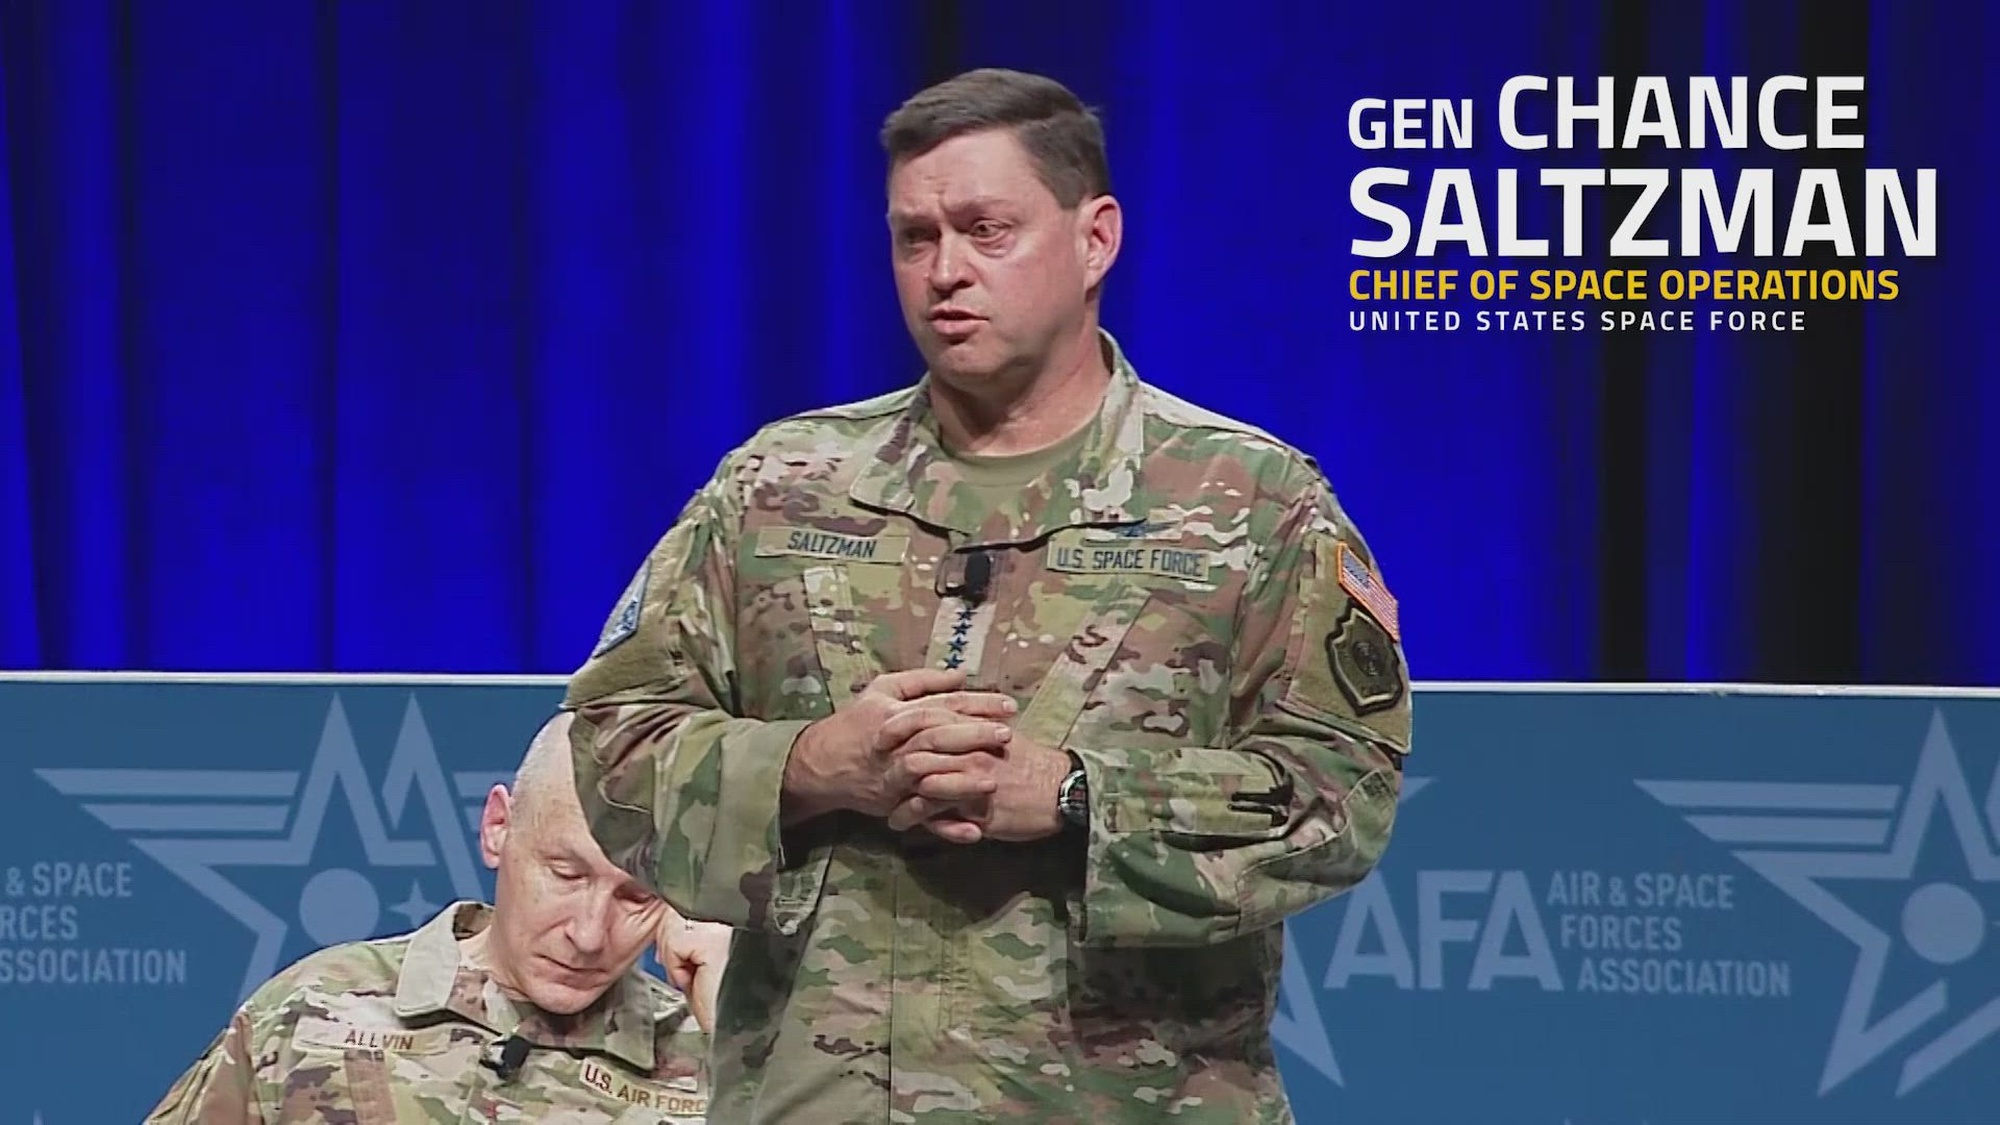 How does the Space Force reoptimize for Great Power Competition? Chief of Space Operations Gen. Chance Saltzman explains the people aspect of the Space Force and how total force #guardians will play a role in ensuring our nation's military superiority. #reoptimization #DAFGPC